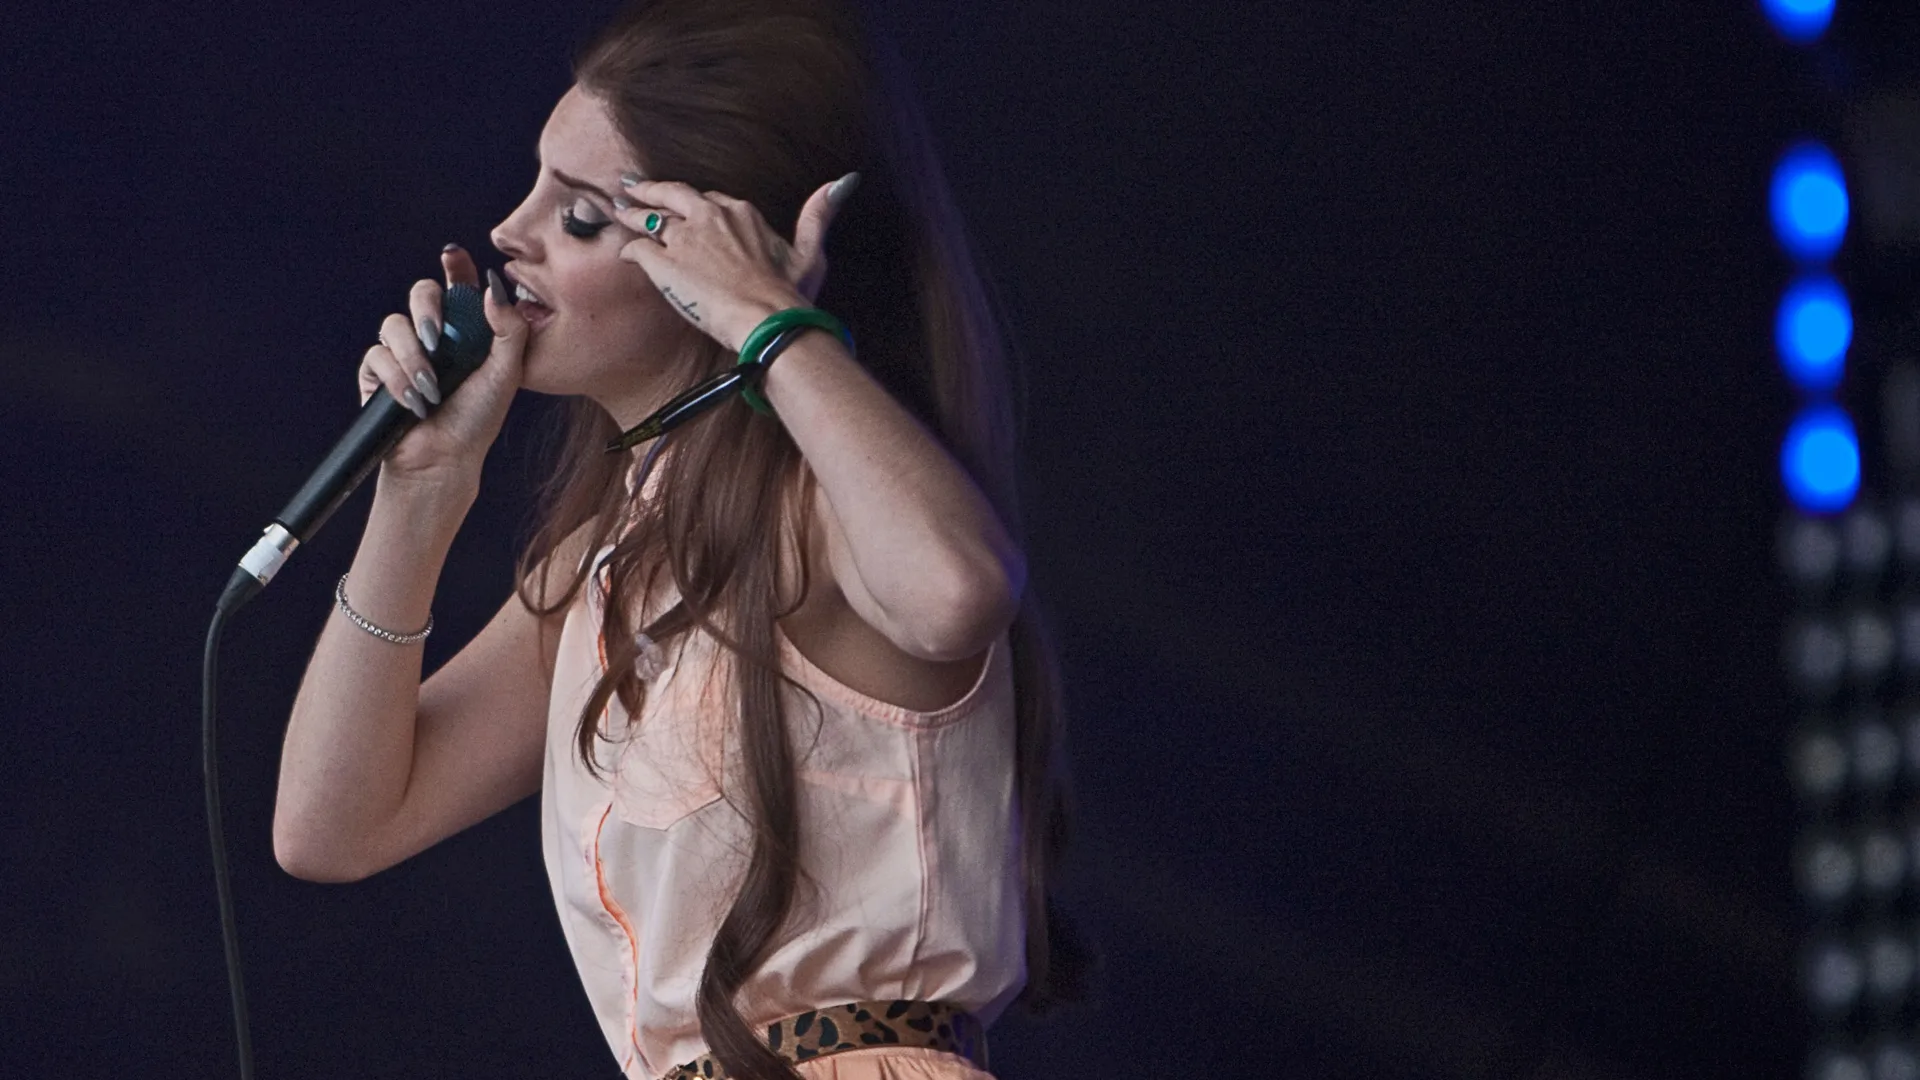 A photograph of Lana Del Ray from the side singing on stage in a pink sleeveless shirt